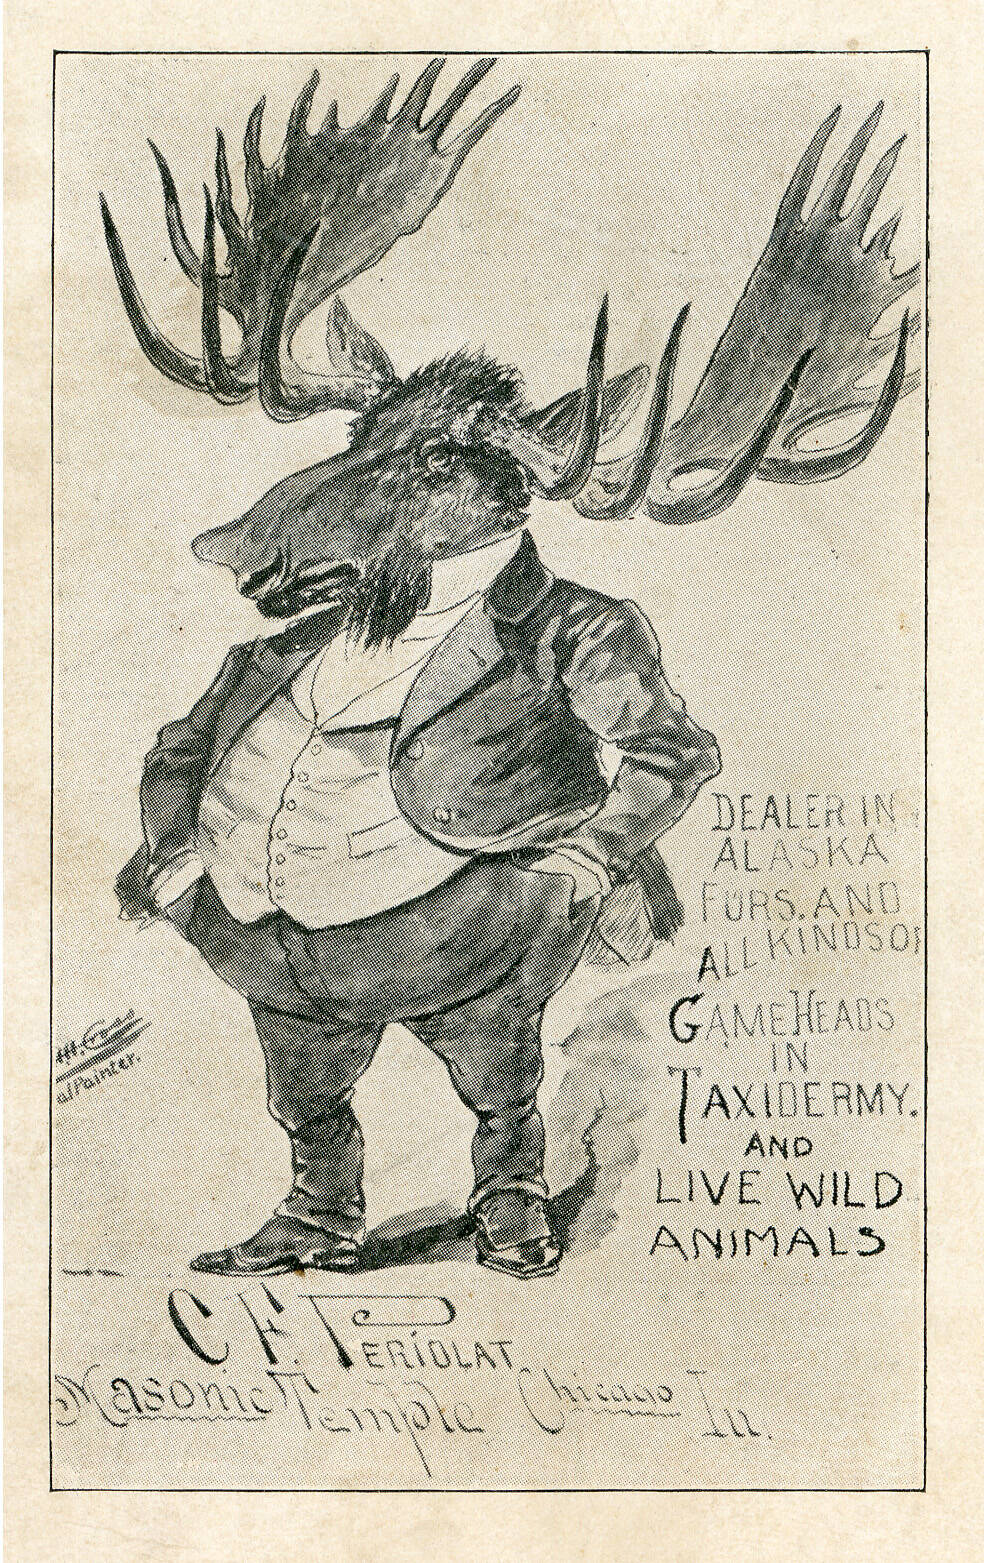 Image courtesy of the Viani Family Collection 
This is a caricature of prominent Chicago fur dealer Clemens F. Periolat, who met P.F. “Frenchy” Vian in about 1901.